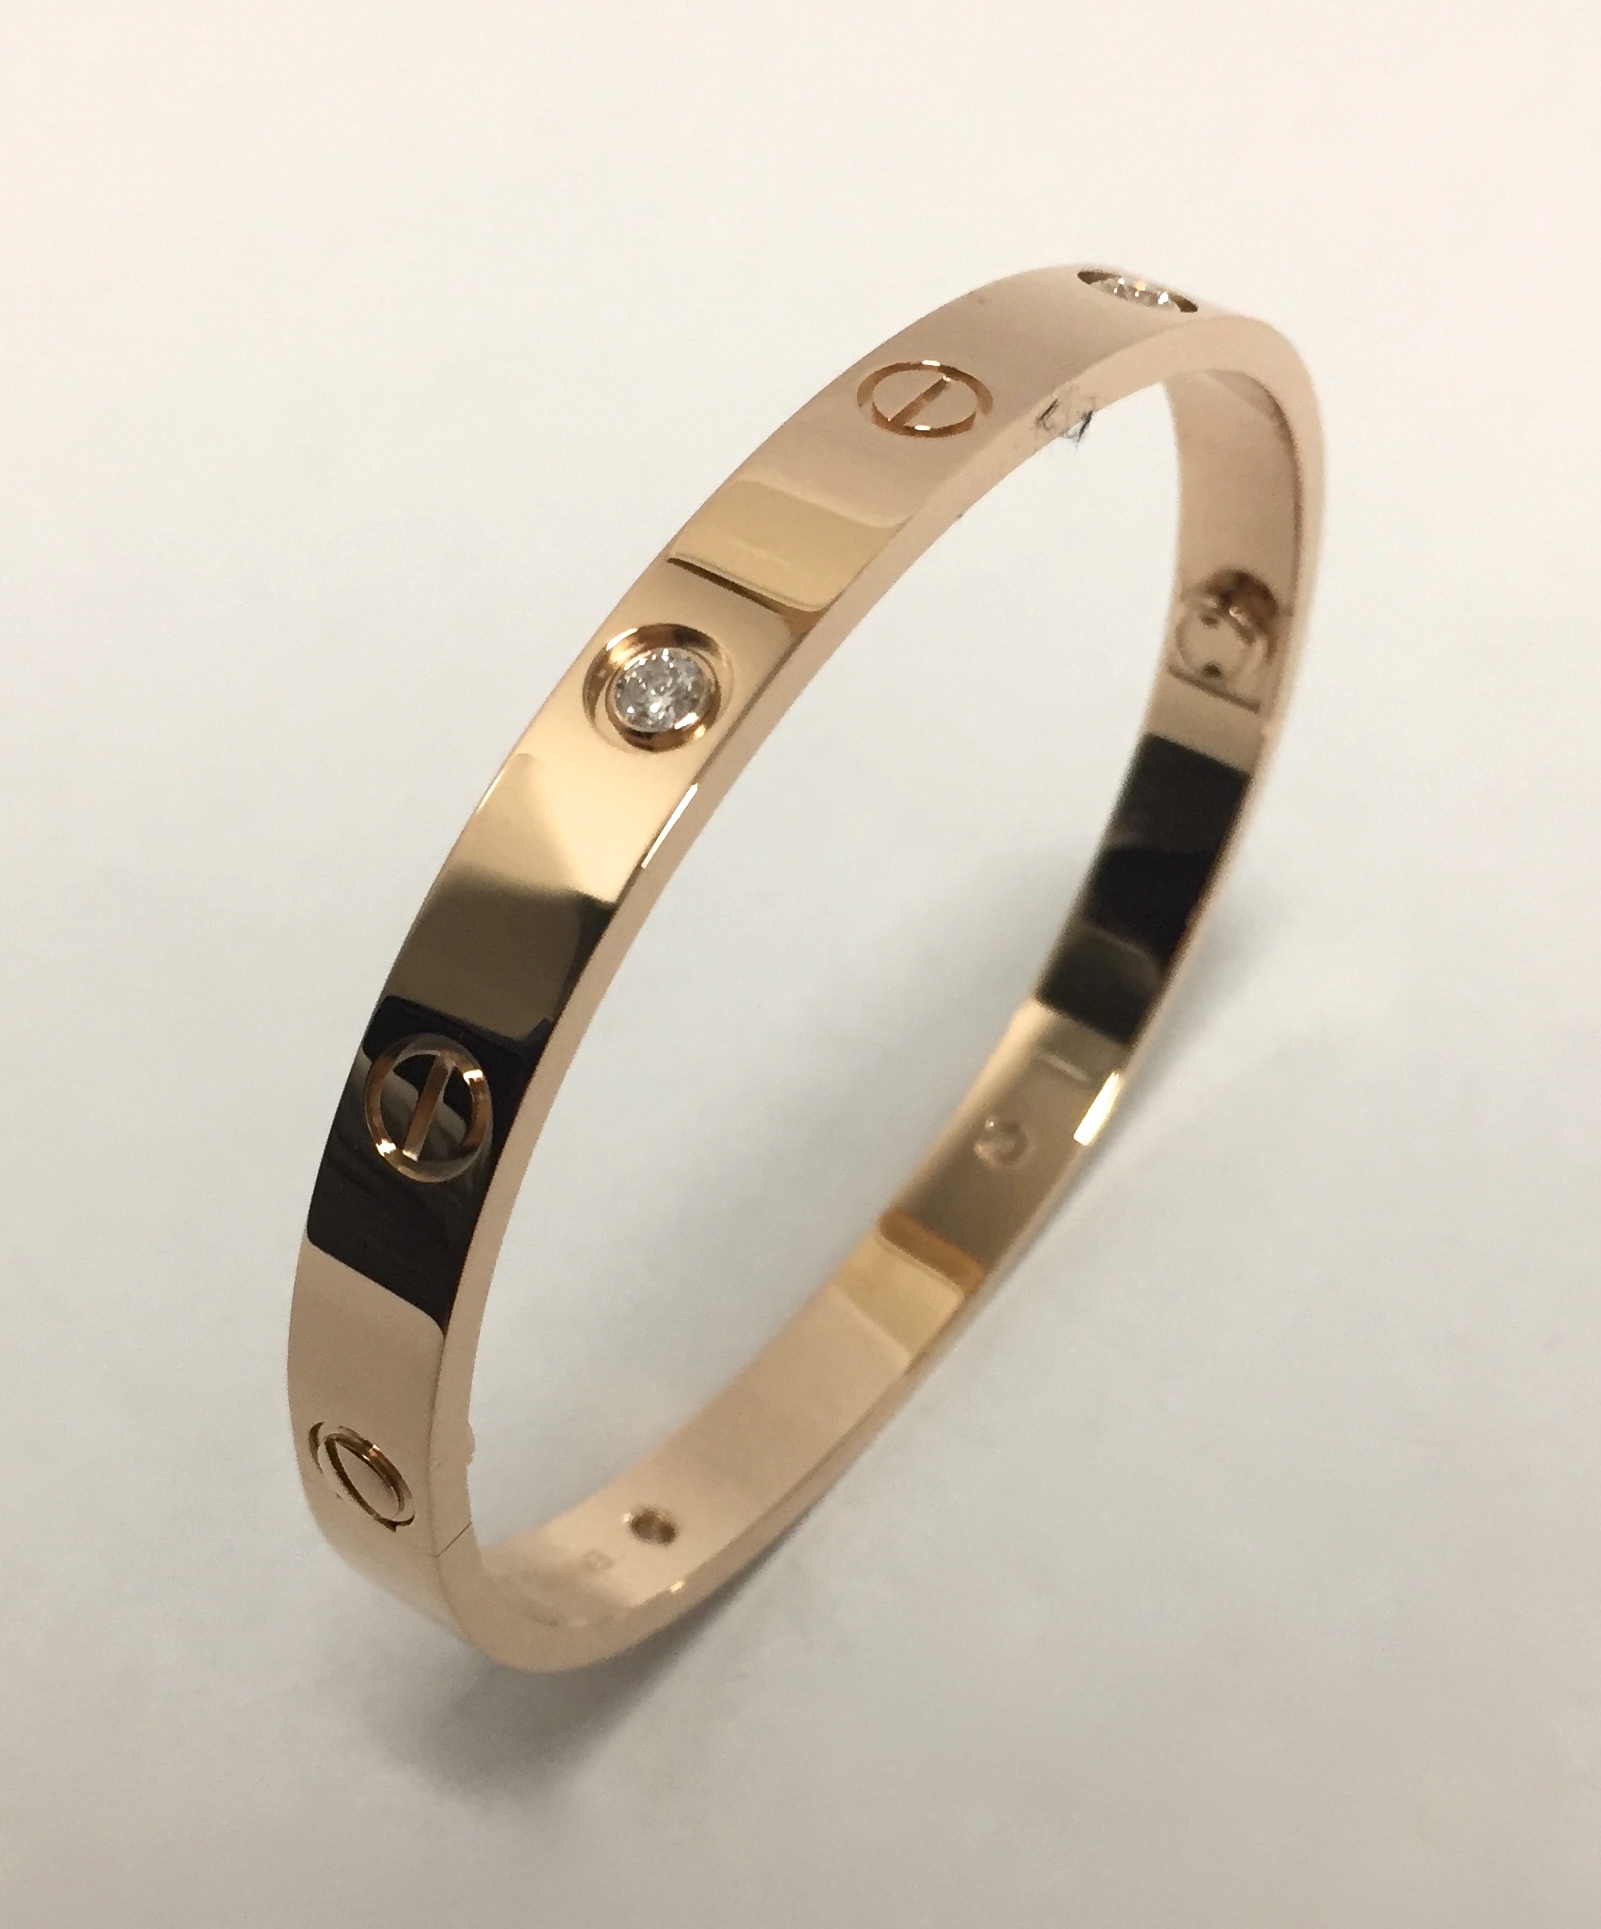 how much is a cartier love bracelet in south africa